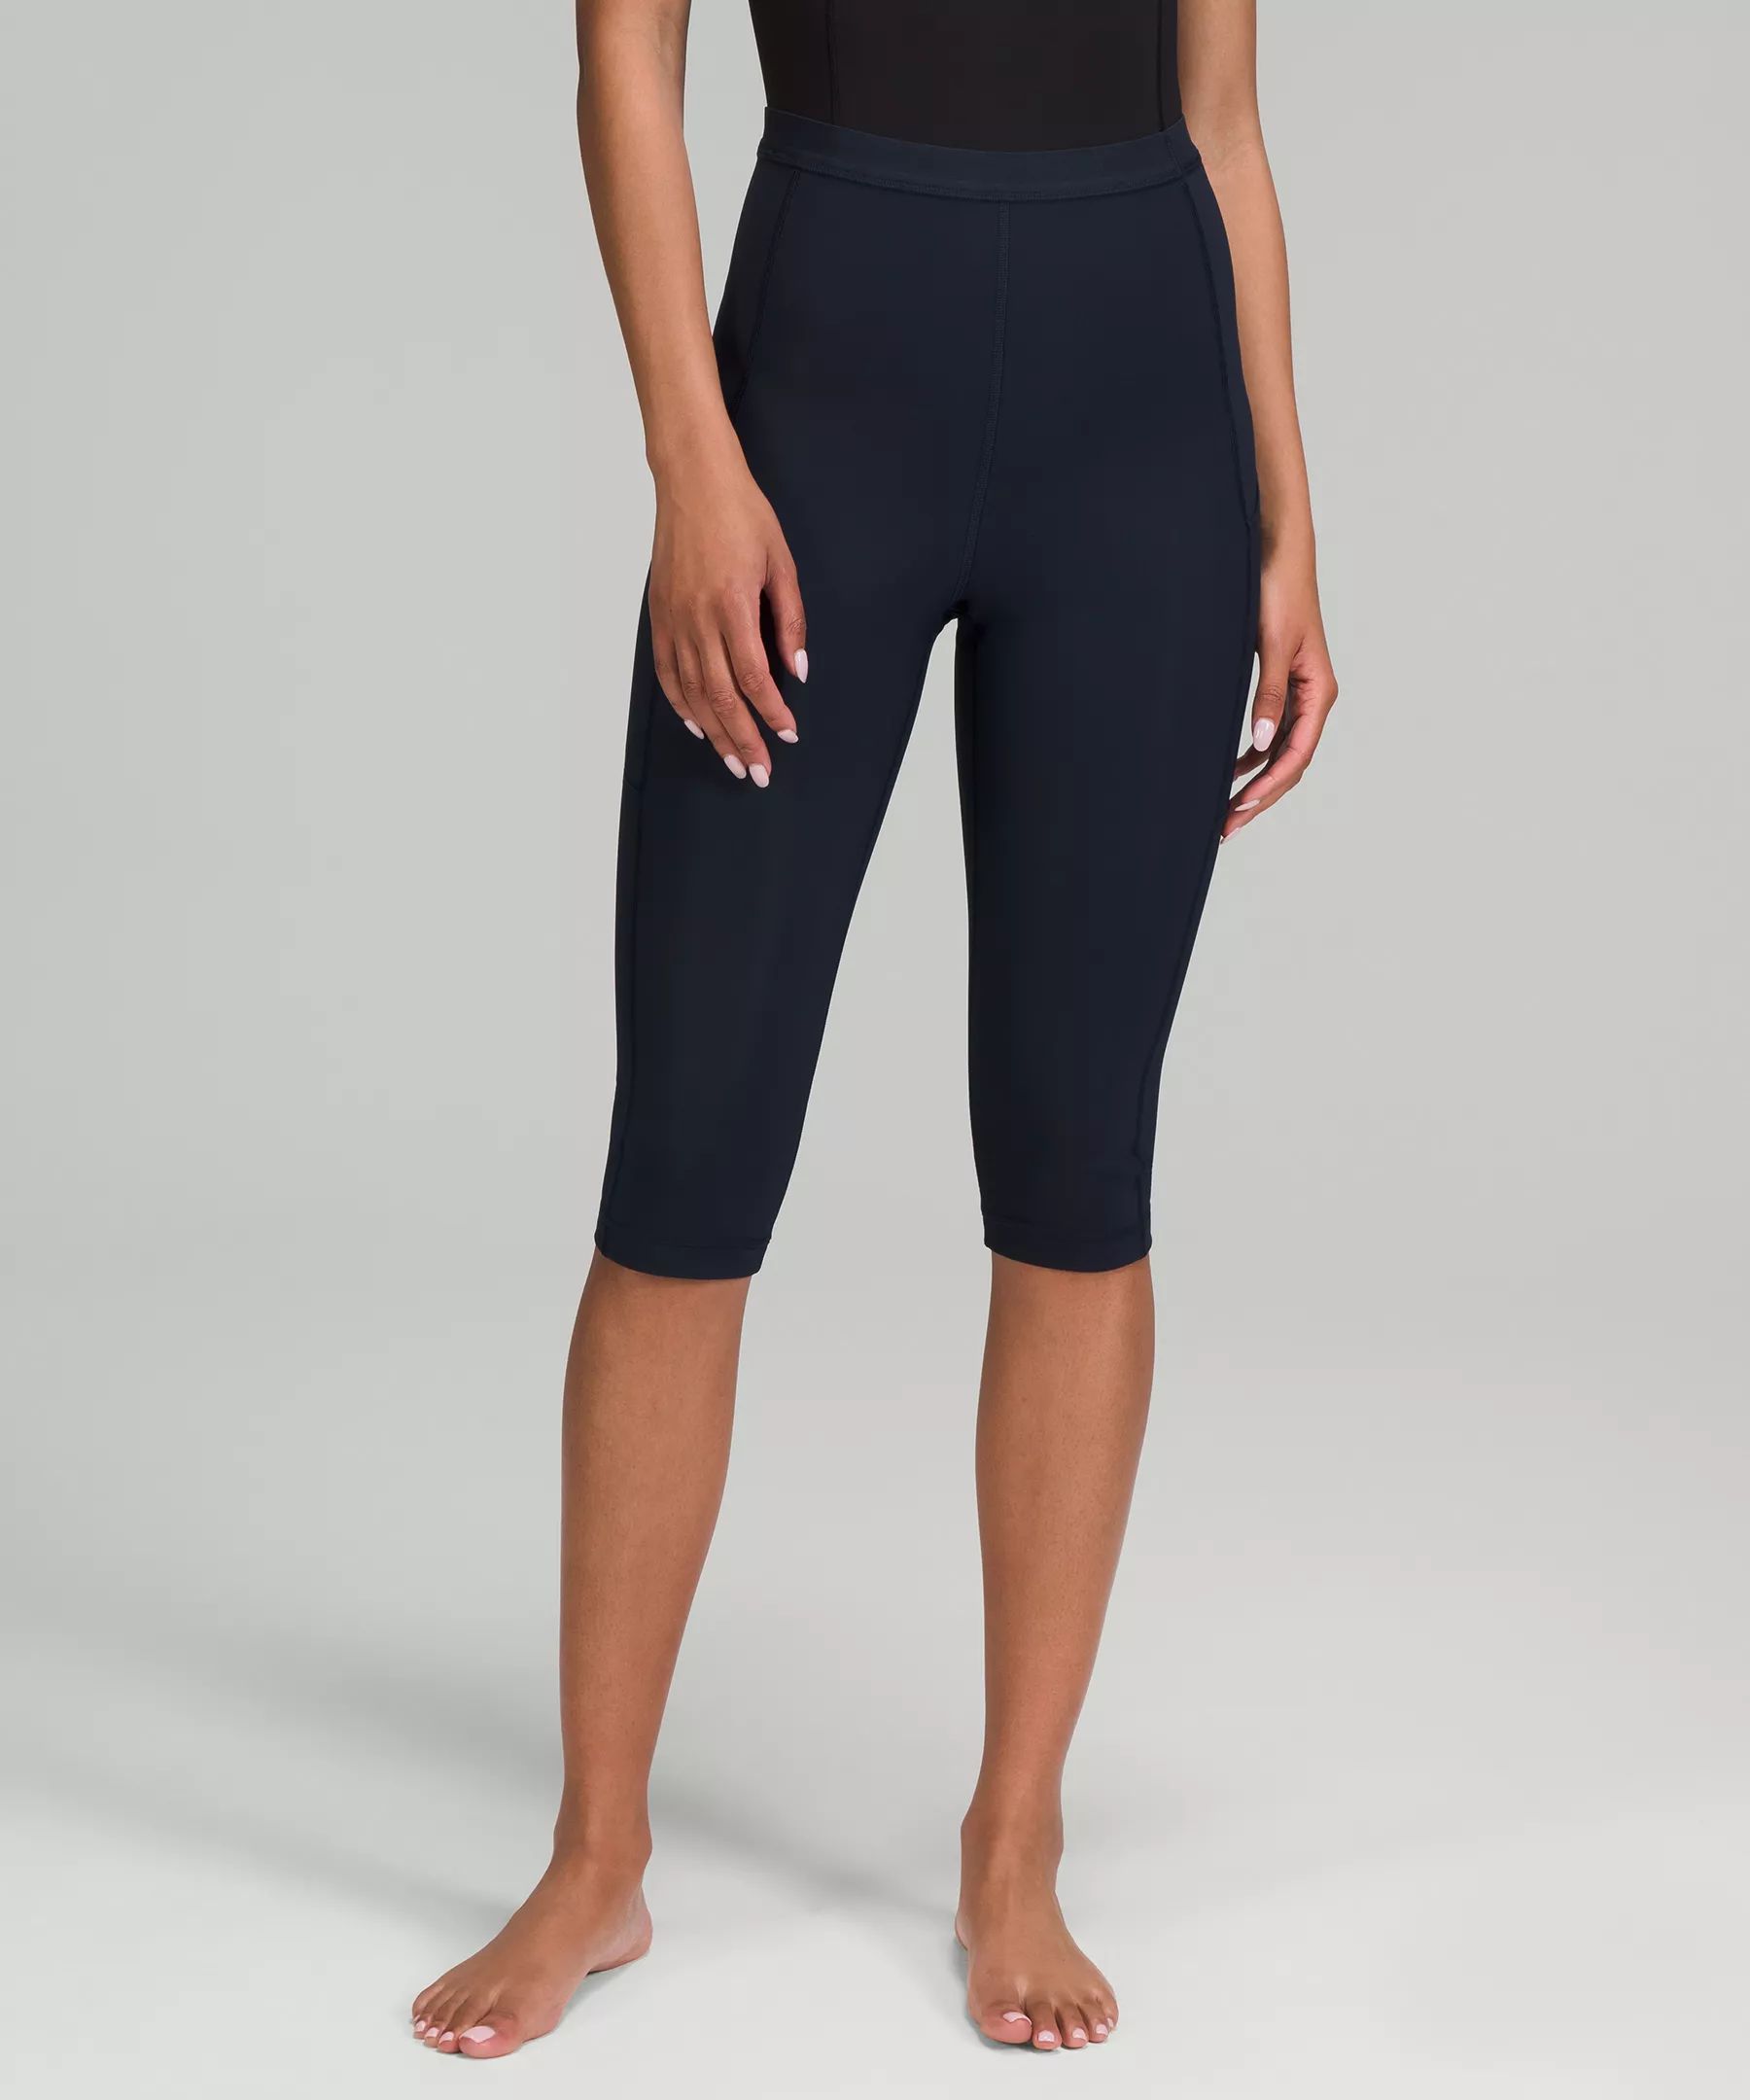 High-Rise Paddle Crop 15.75" Length Online Only | Lululemon (CA)